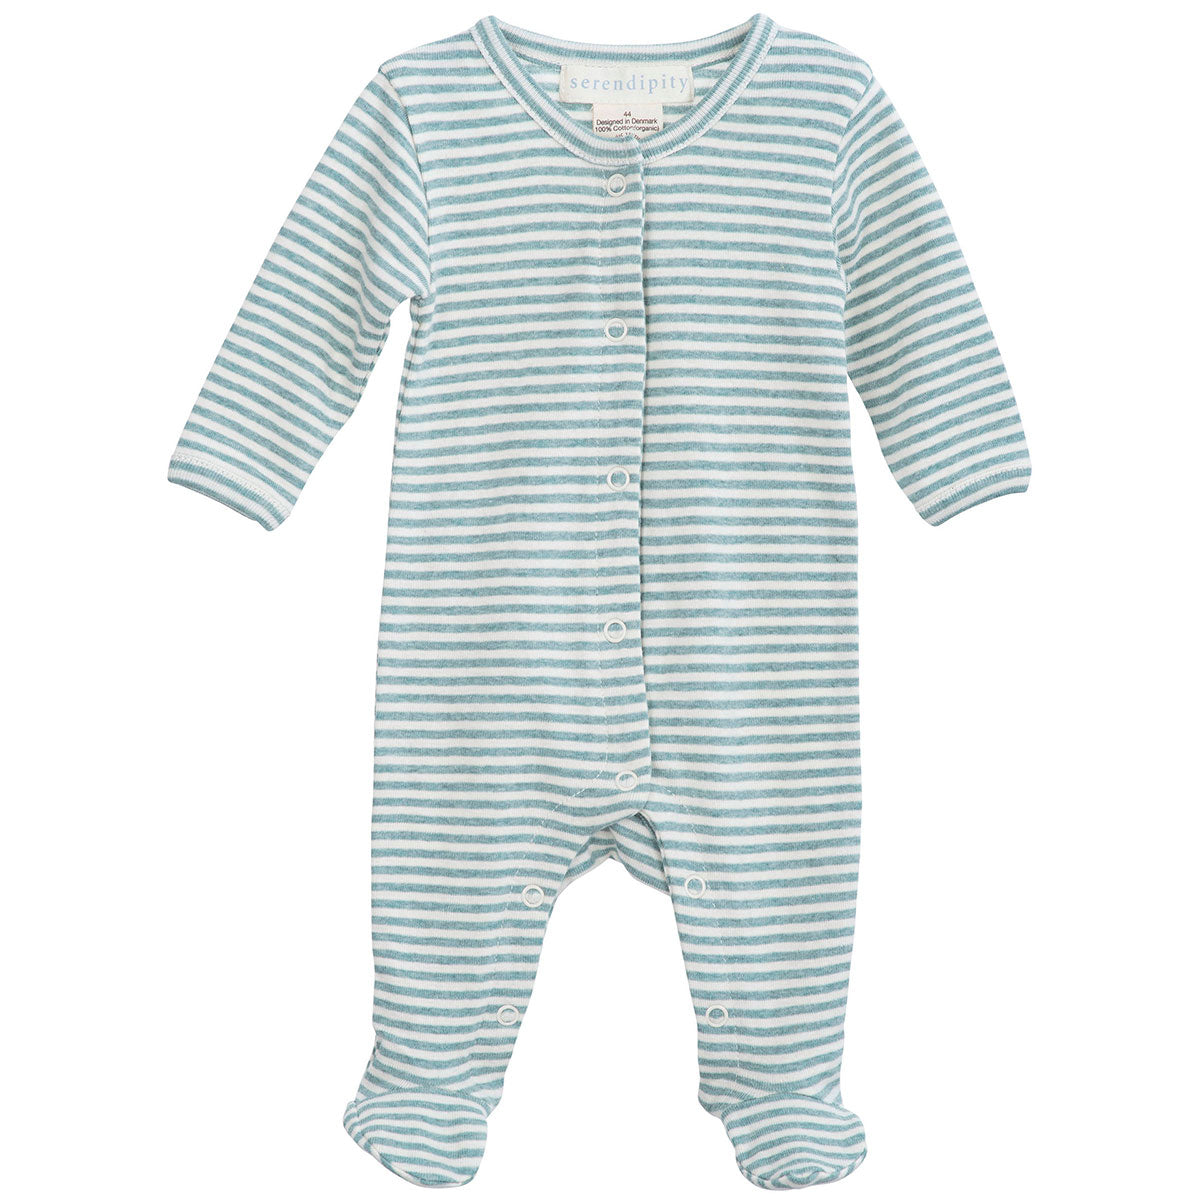 GOTS certified newborn suit with feet.Snap buttons for easy changing.100% Organic  cotton,light blue and ecru stripes.